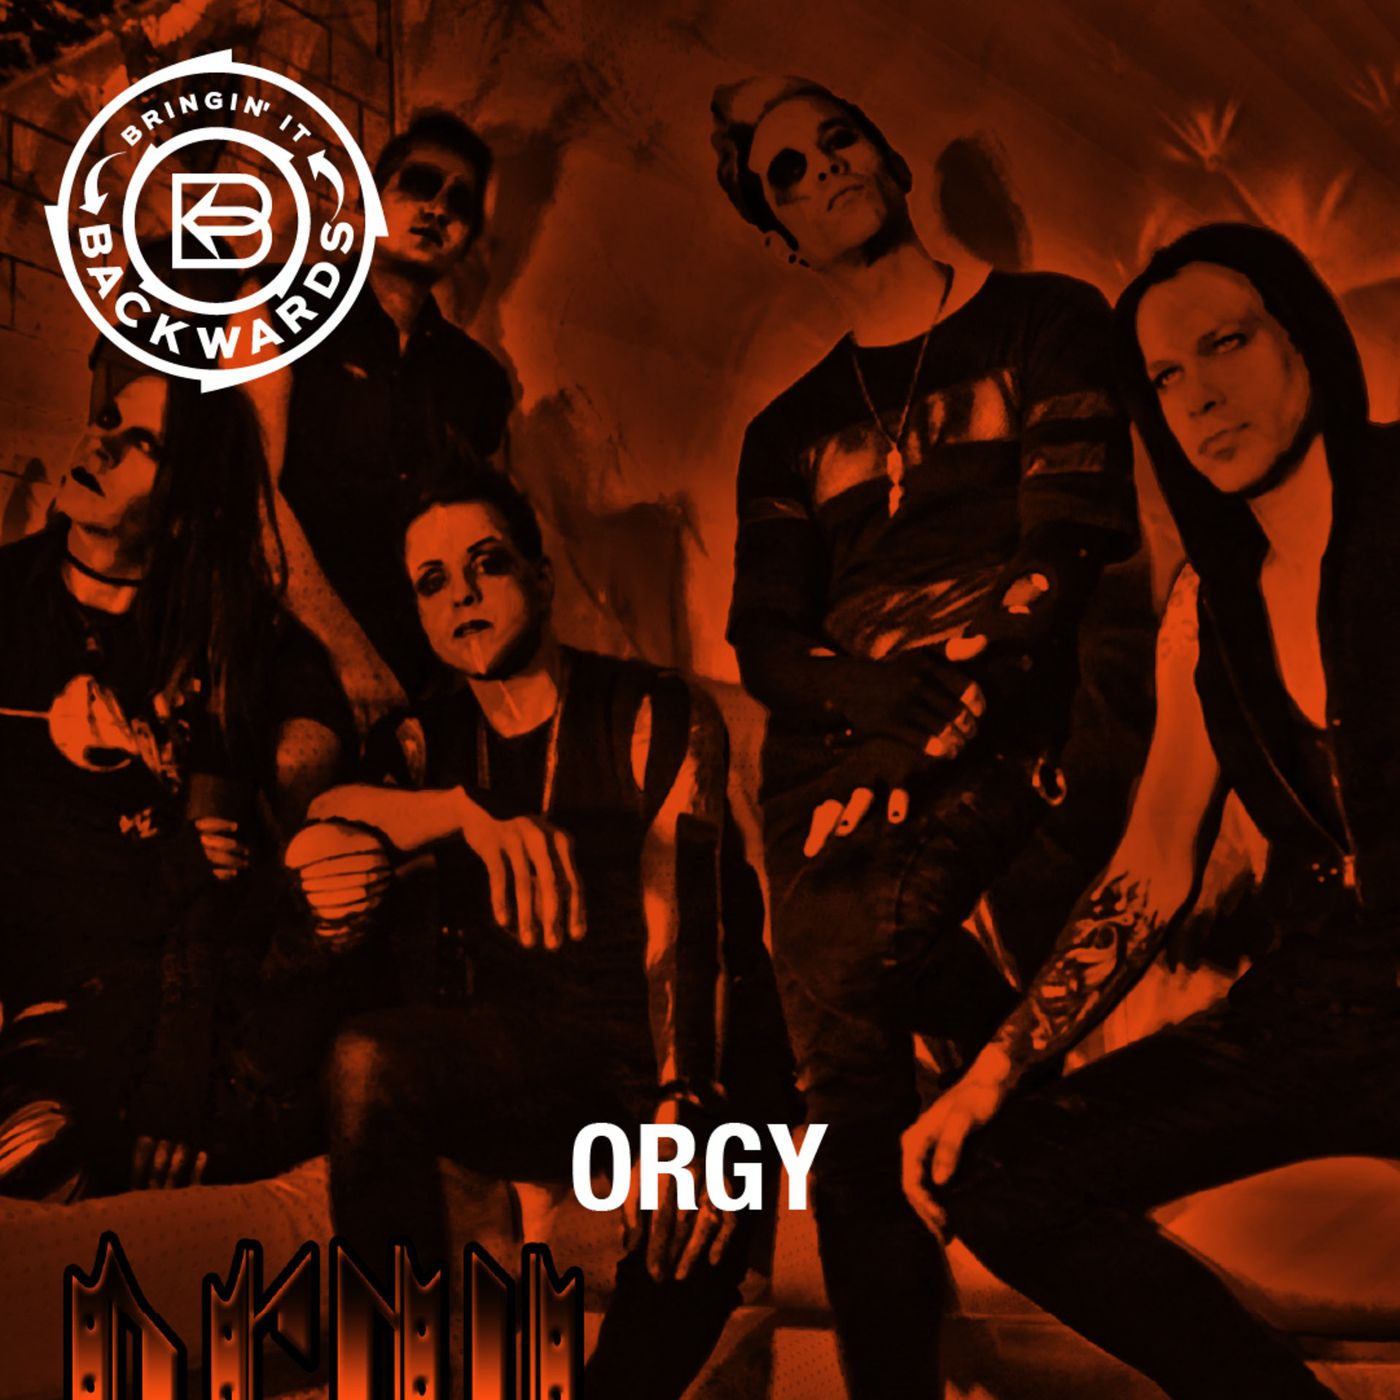 Interview with Orgy